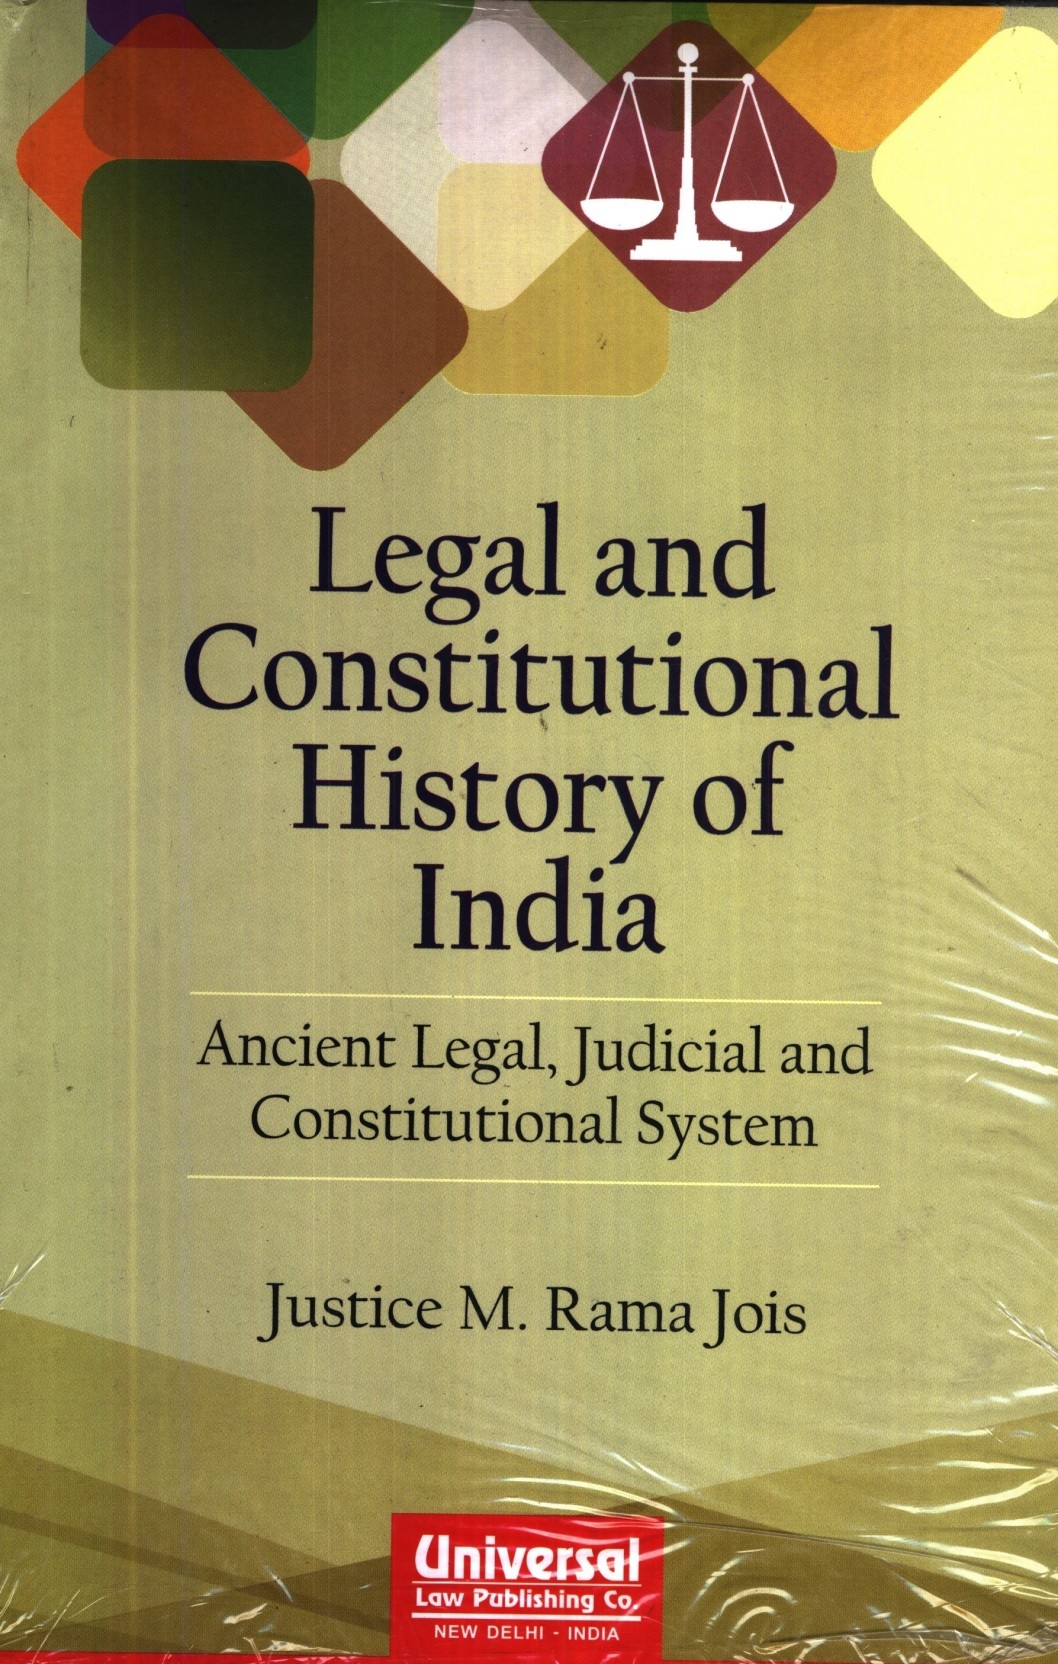 history of legal research in india